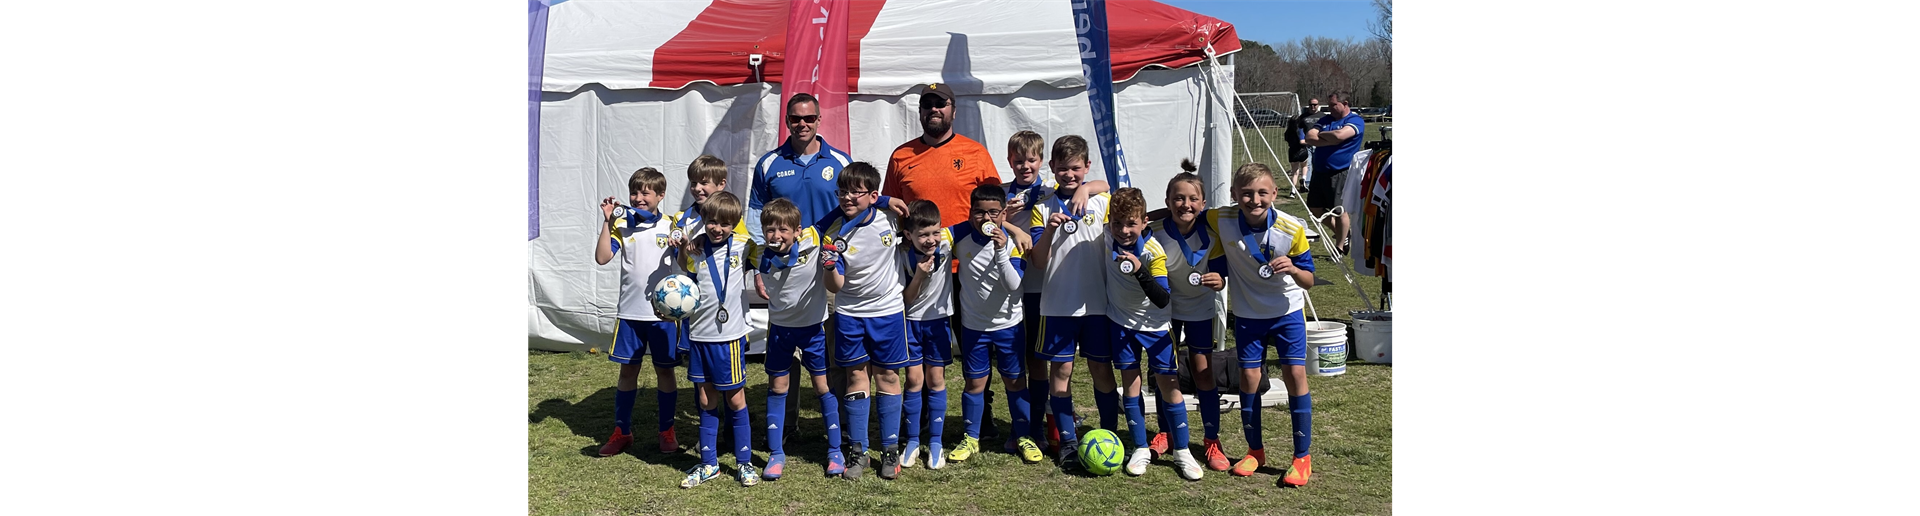 Congrats to U10 Destroyers!